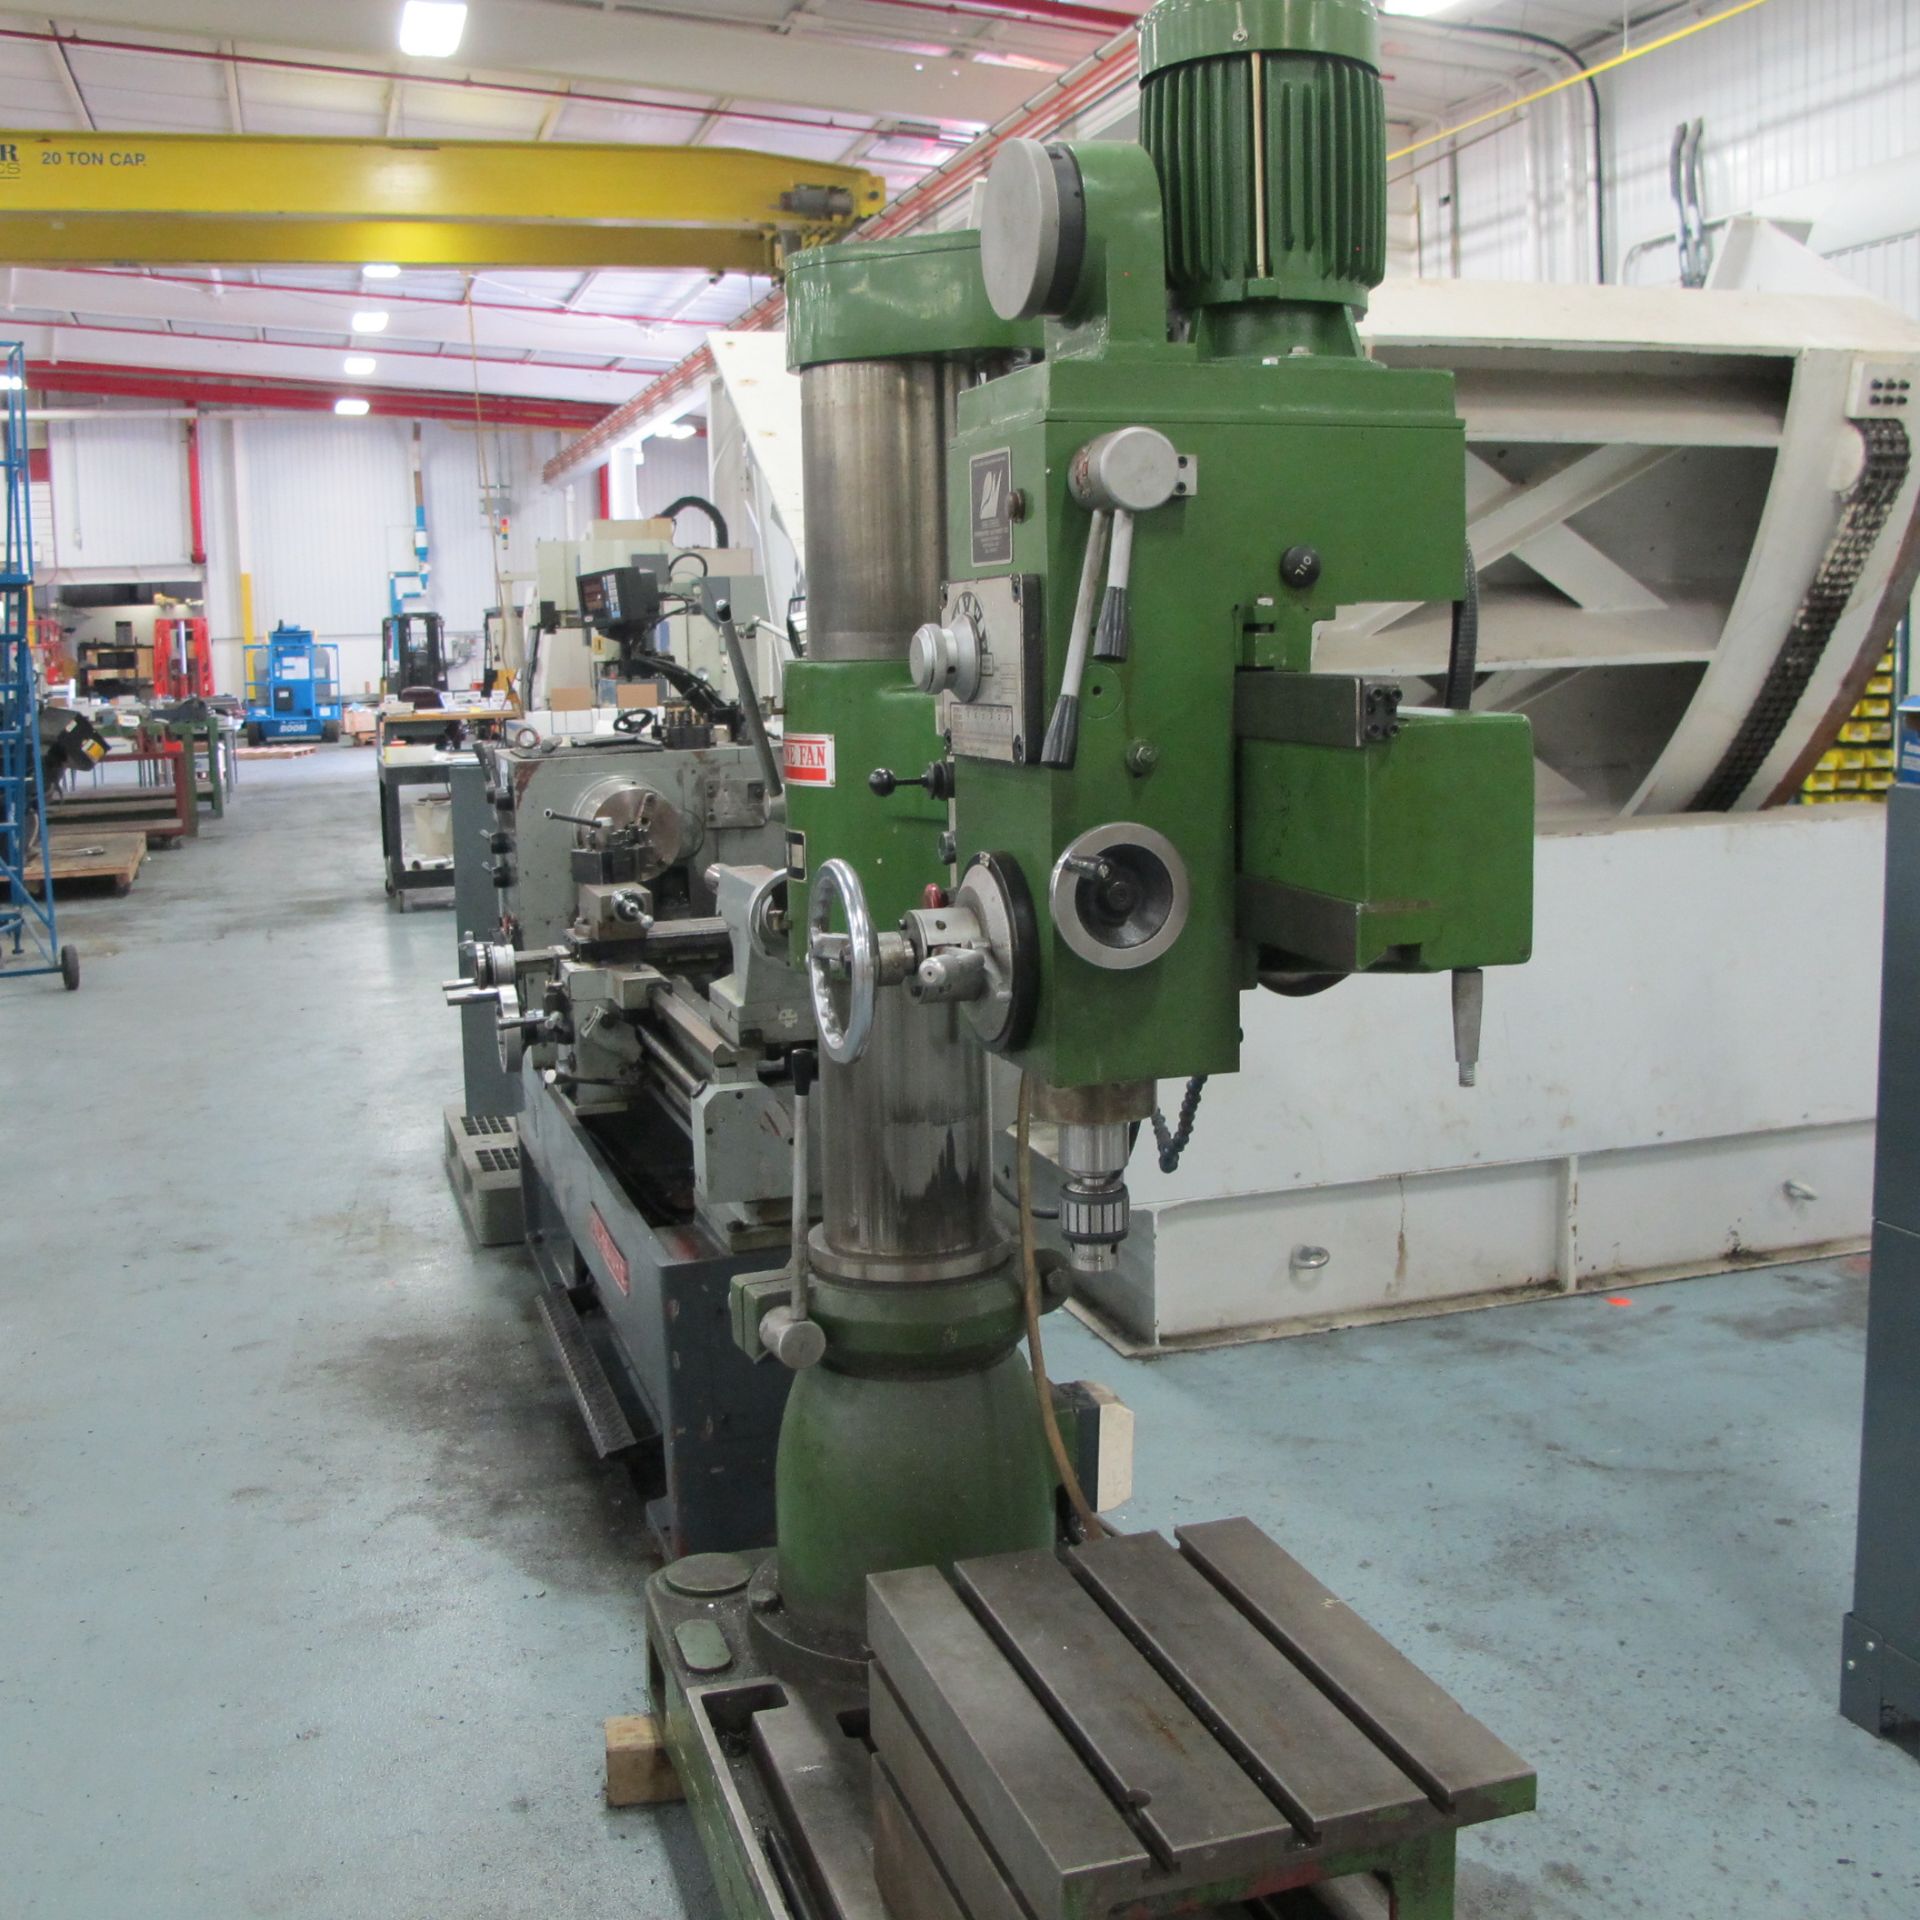 2002 TONE FAN RD-900, 3' RADIAL ARM DRILL, S/N: 3827 WITH BOX TABLE, 88 TO 1500 RPM, 2 1/12" - Image 4 of 5